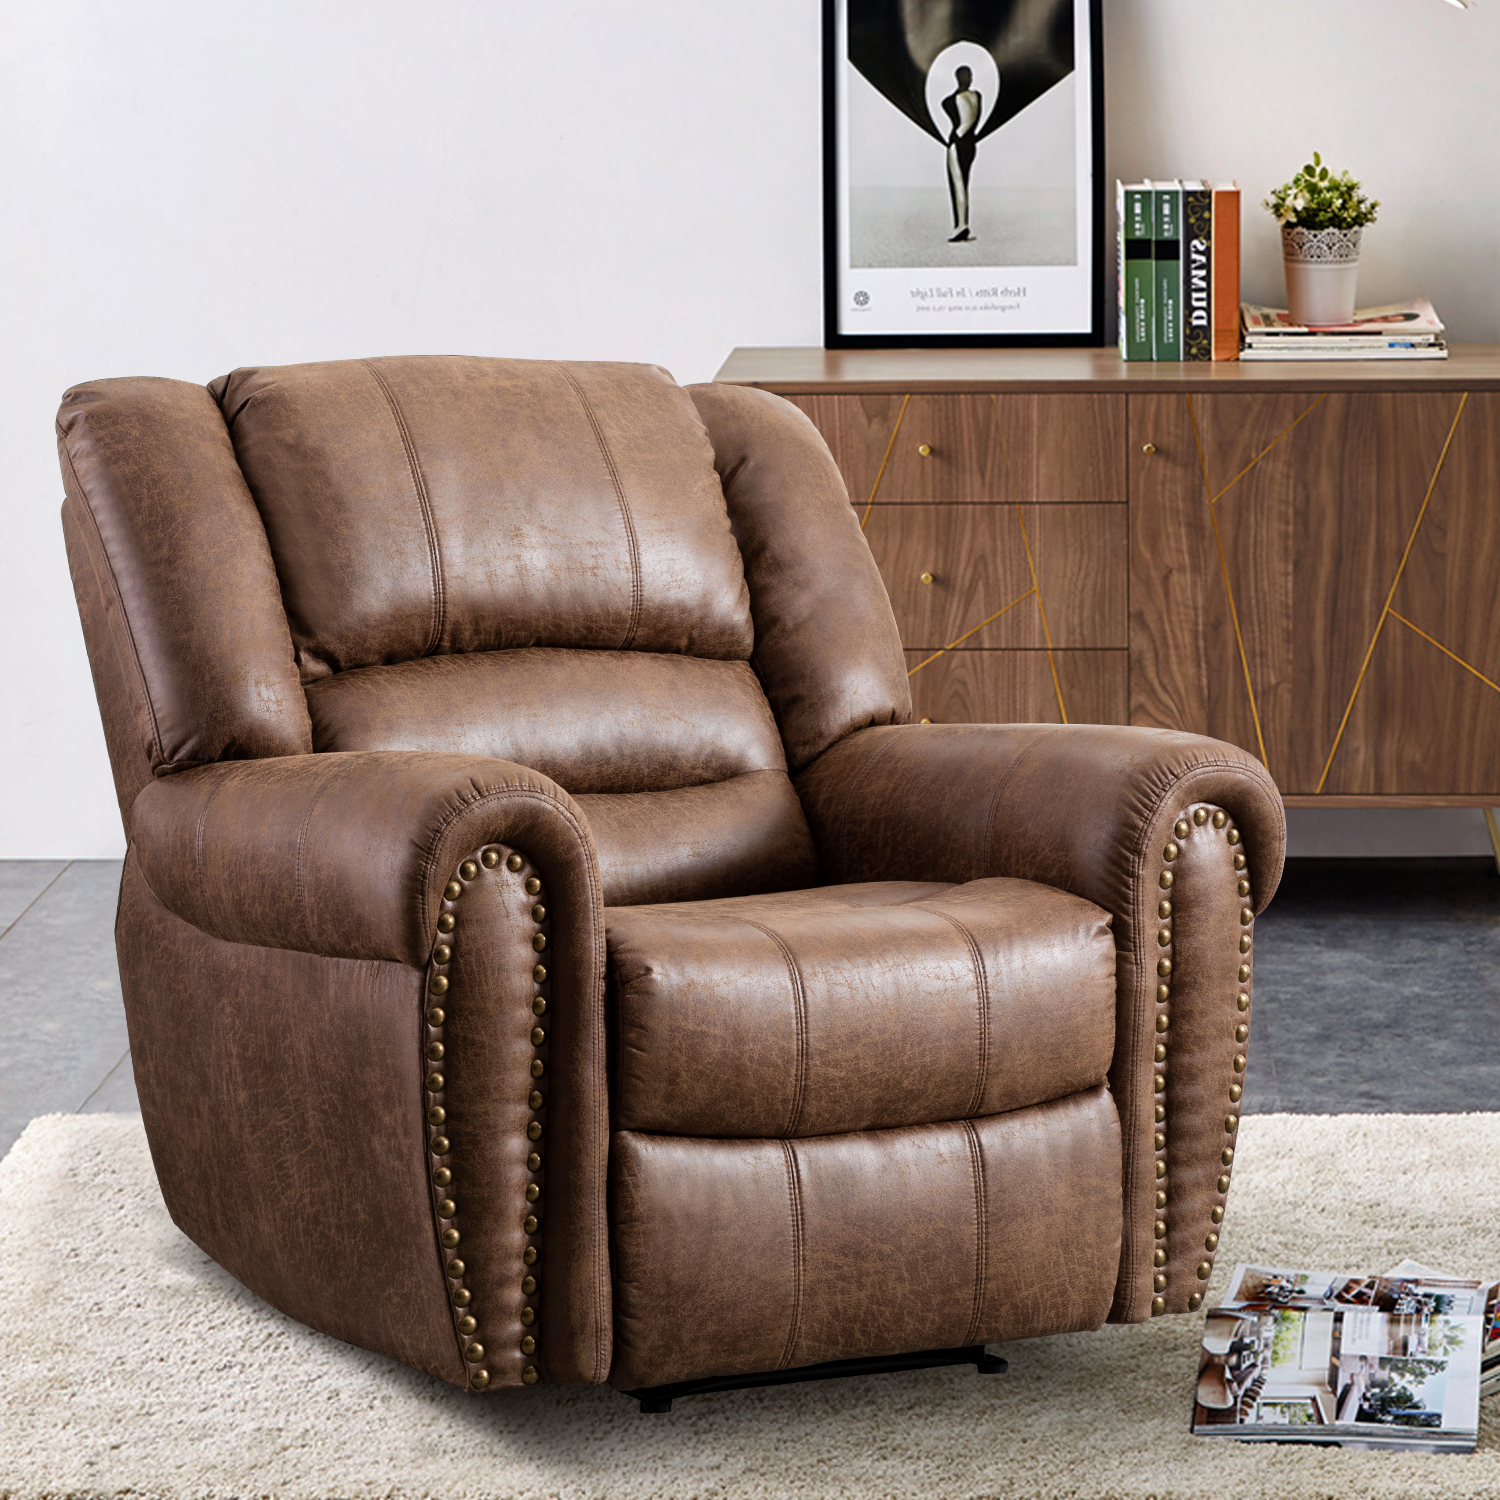 Leather Recliner Chair, Heavy Duty Manual Reclining Sofa Single Lounge Sofa for Living Room, Home Theater Seating, Light Brown-Boyel Living